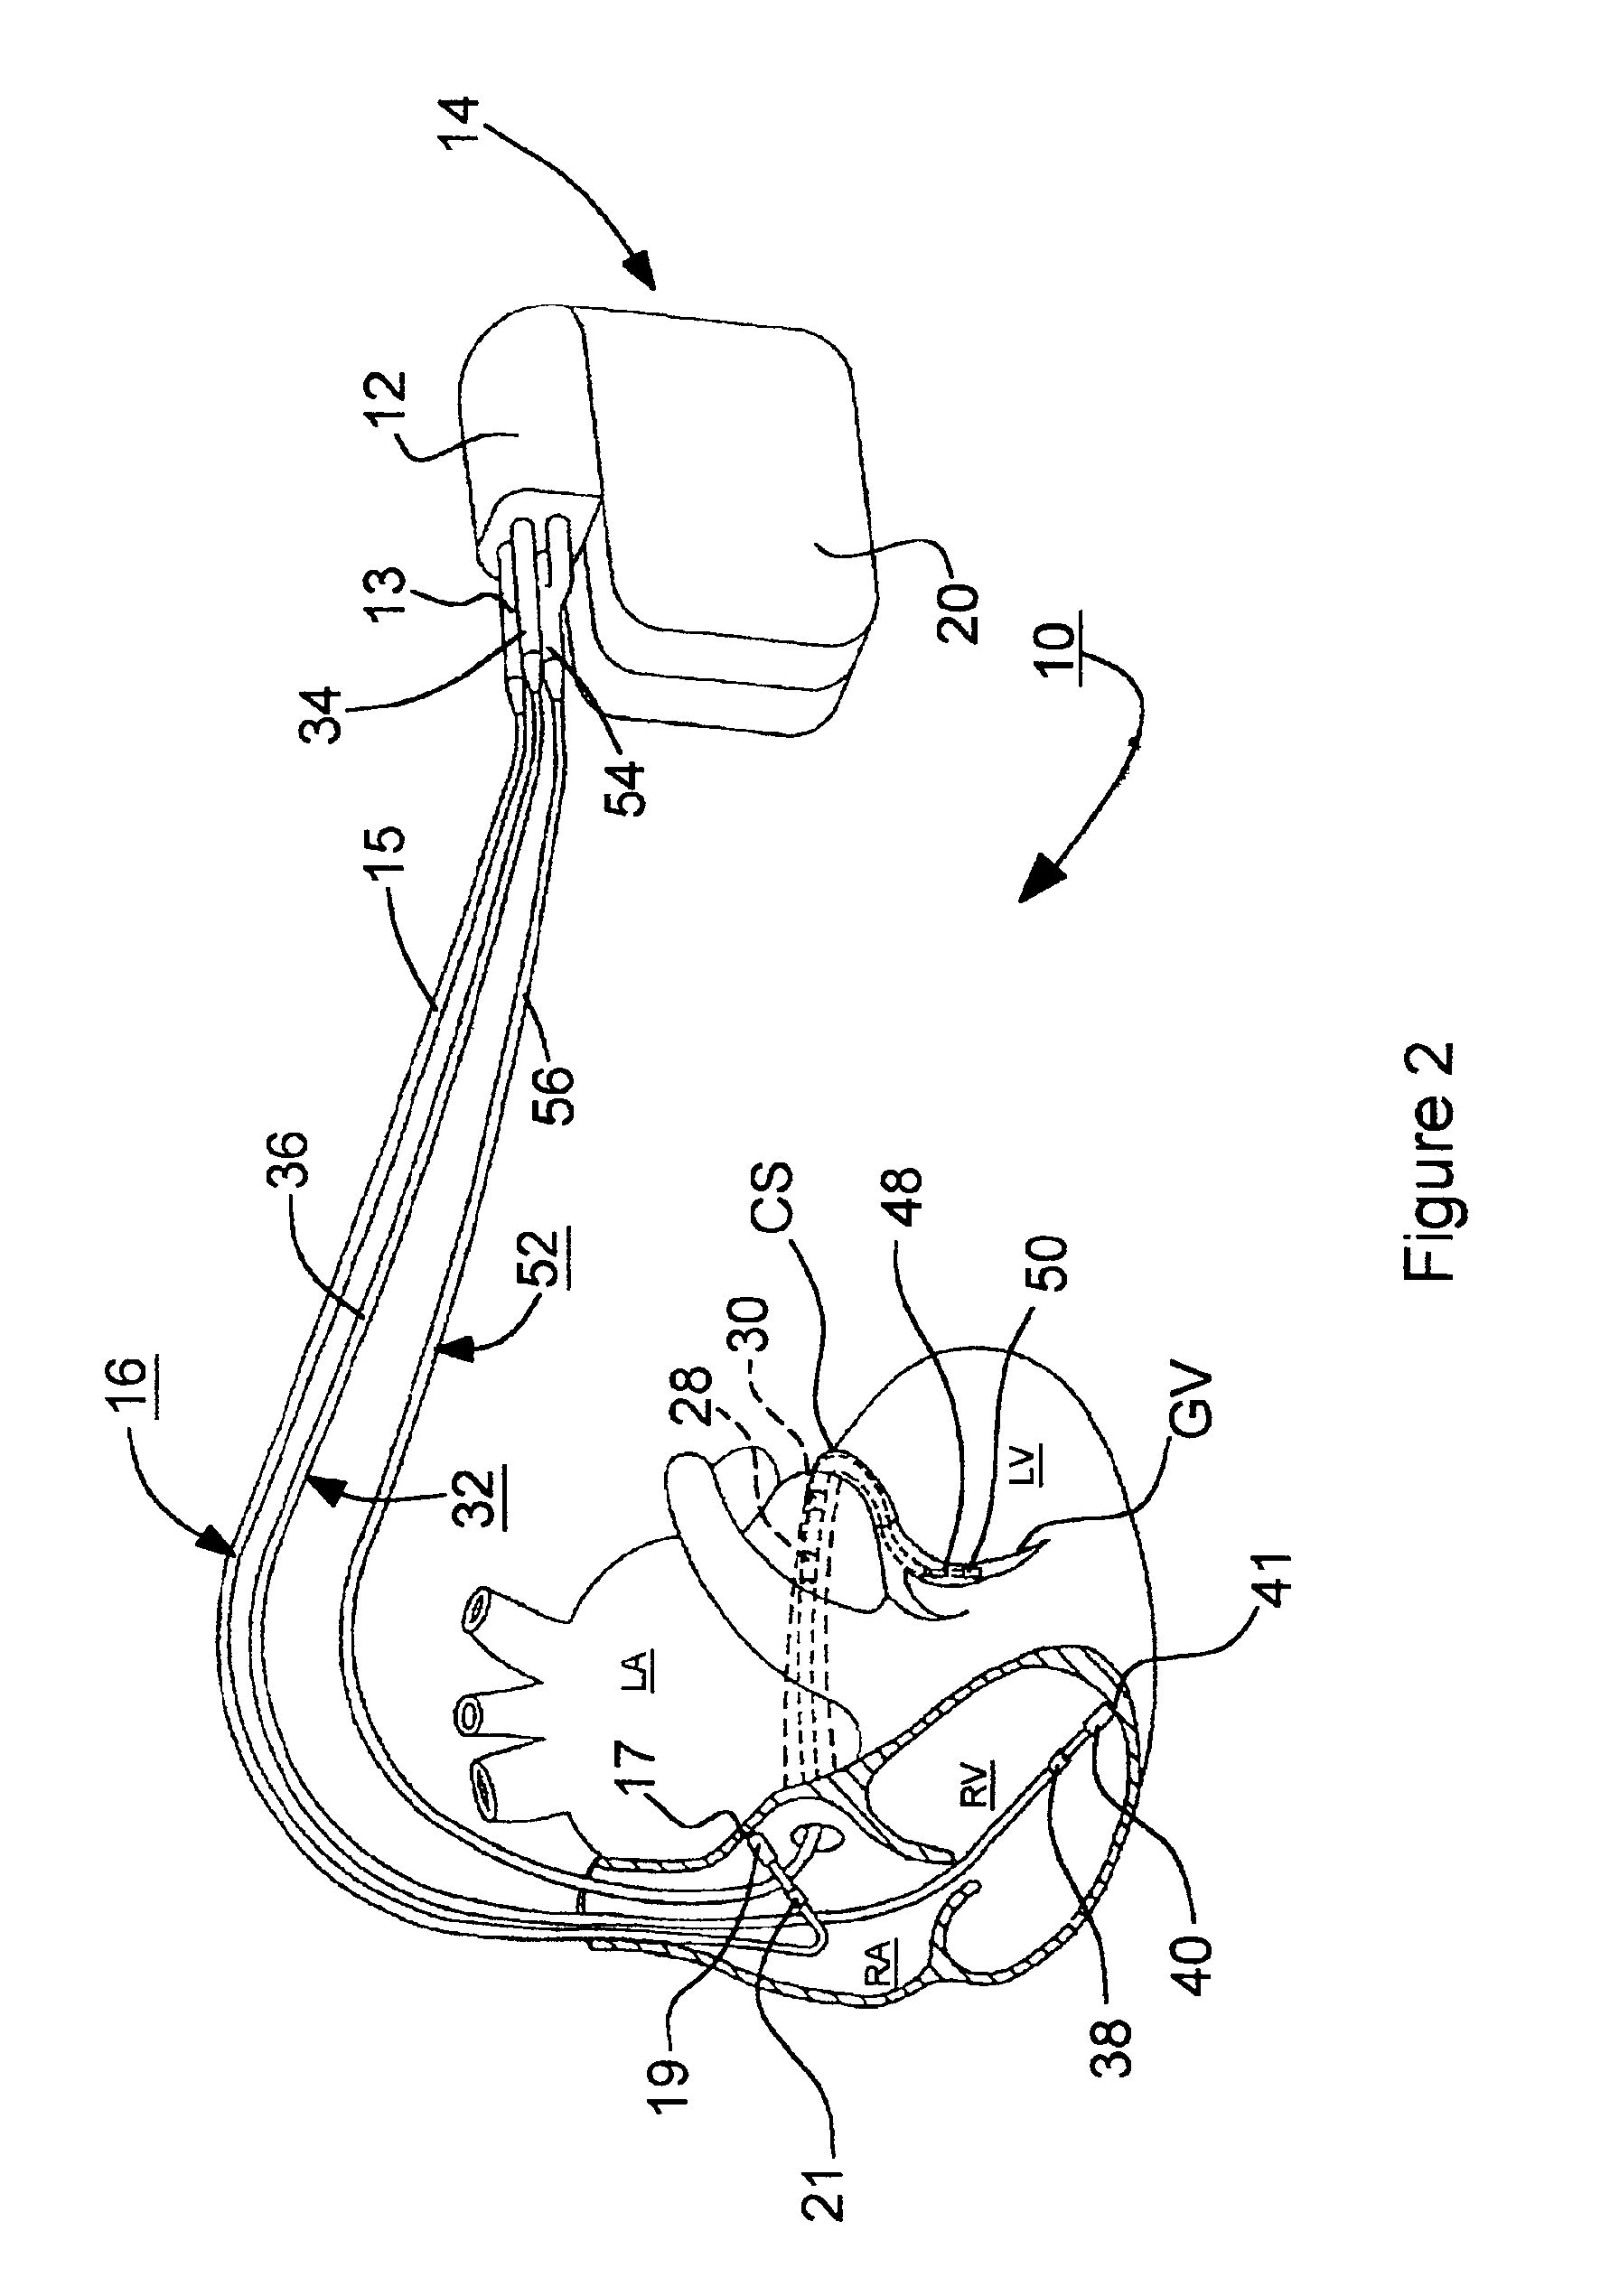 System and method for bi-ventricular fusion pacing